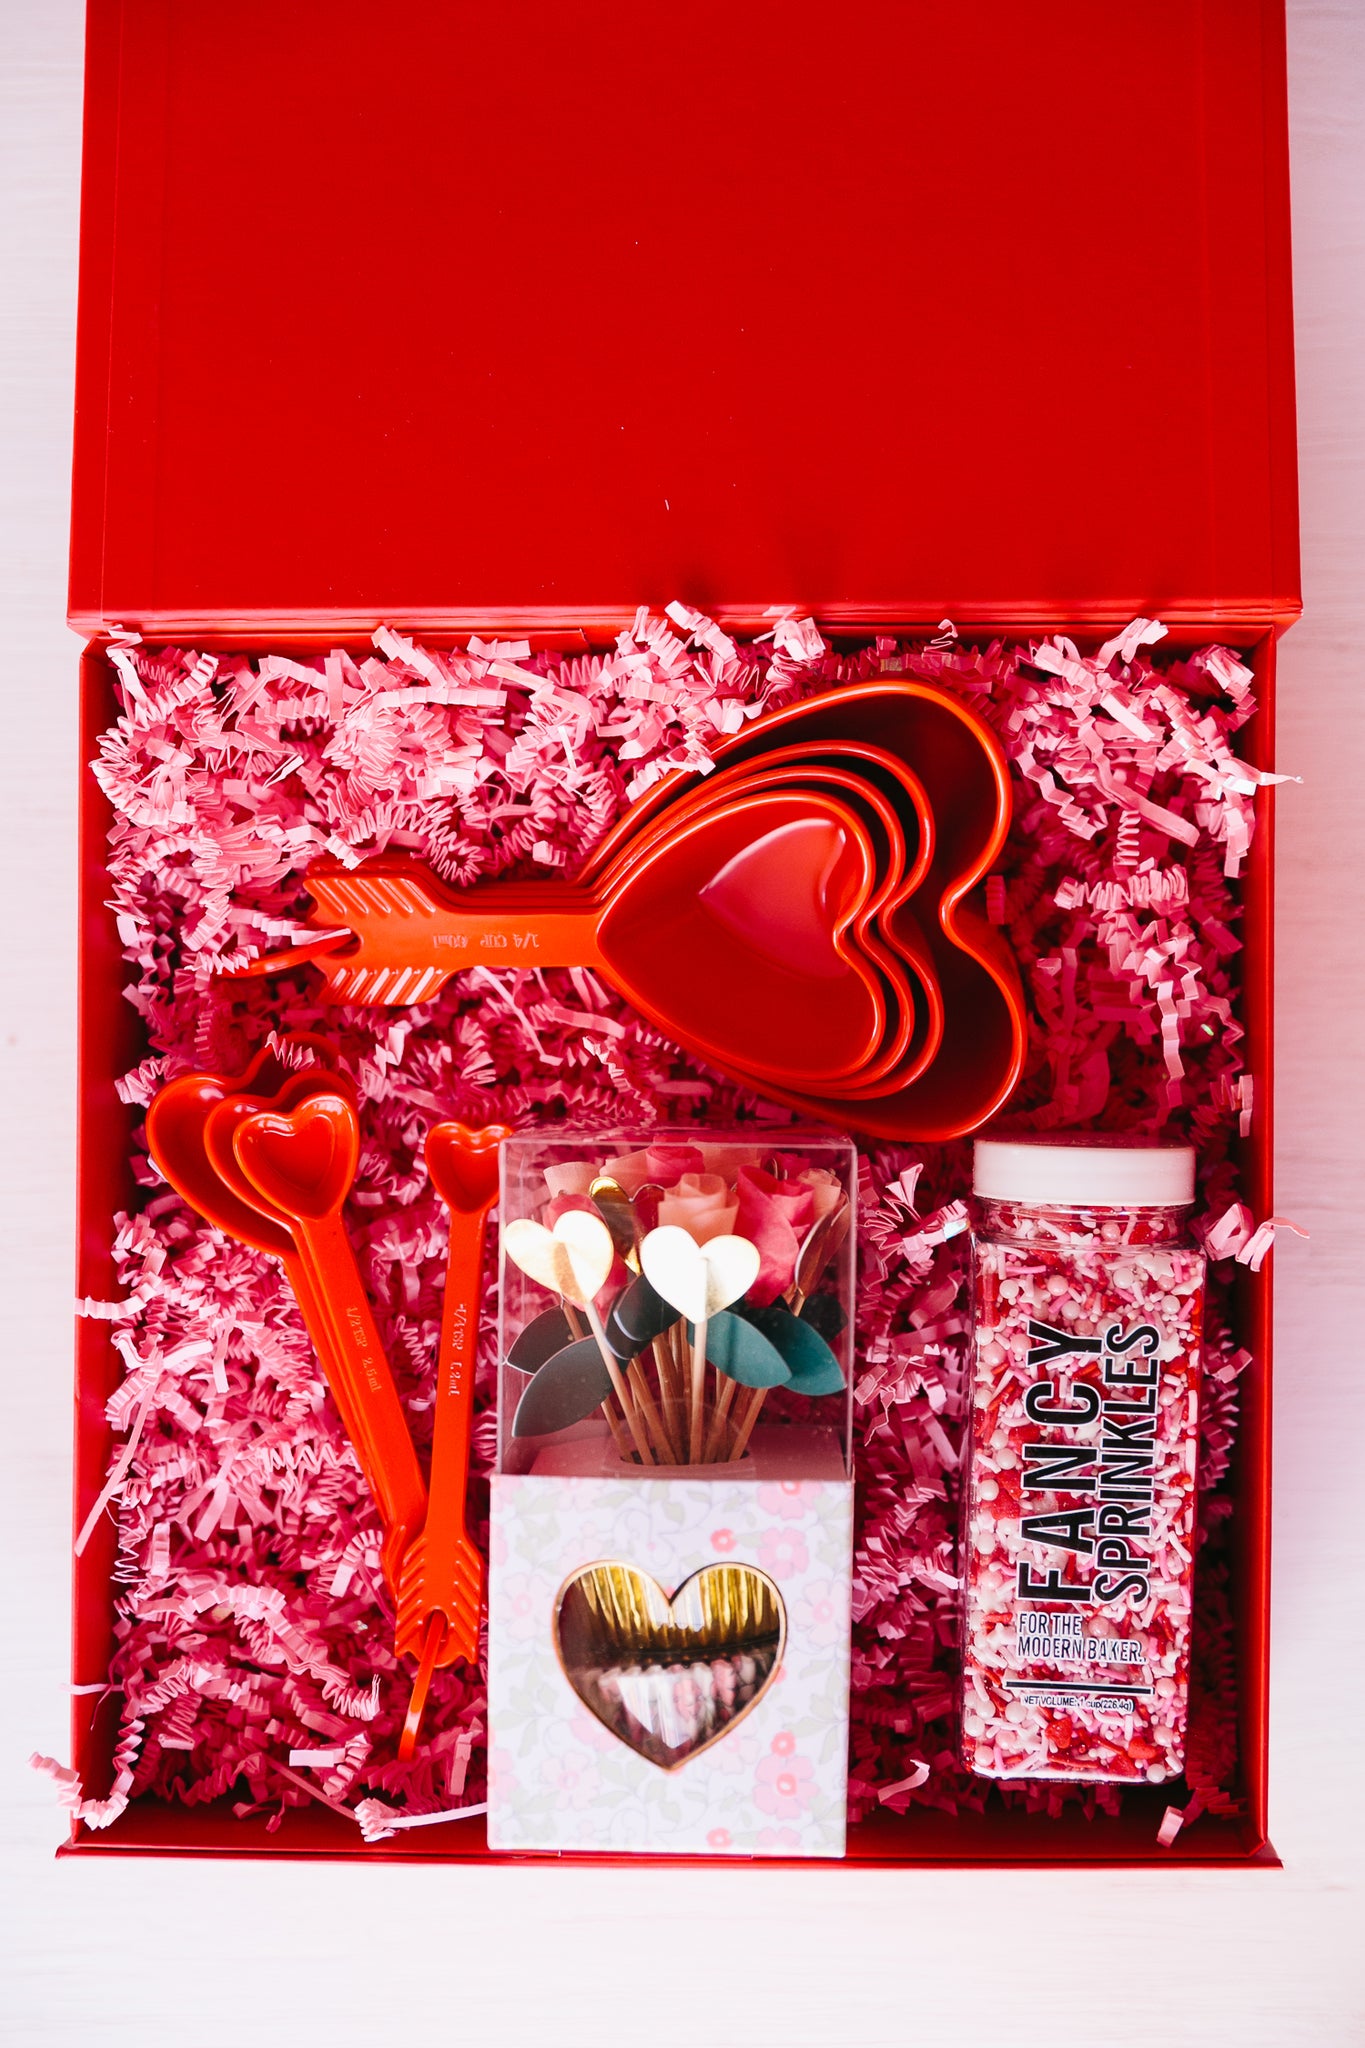 Heart shaped baking supplies and sprinkles as a Valentine's Day gift idea